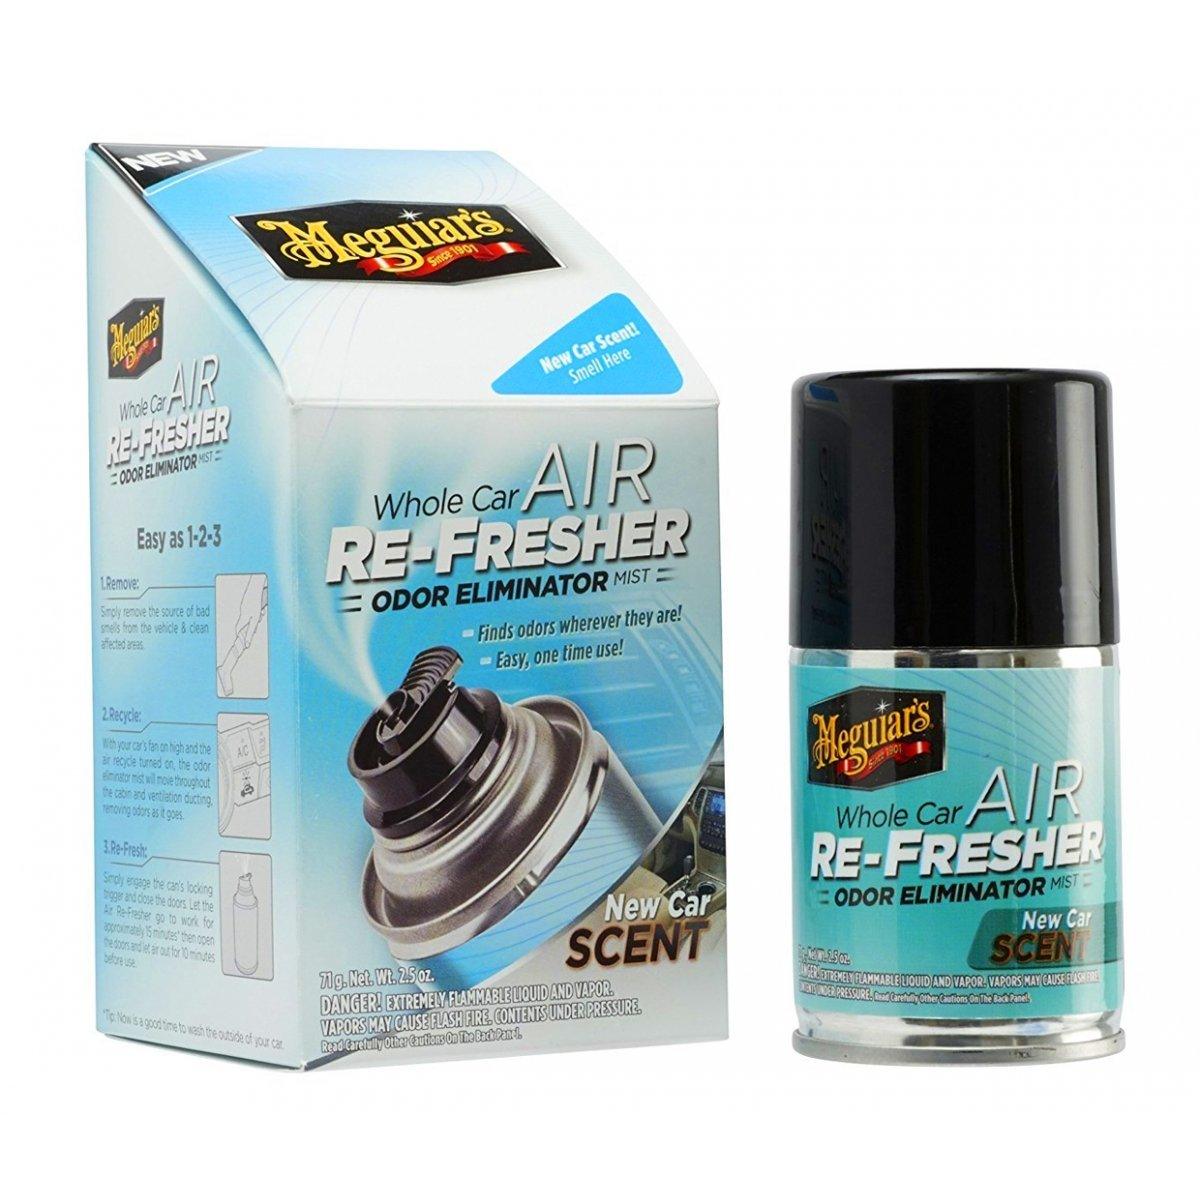 Meguiars Luktborttagare Air Re-Fresher New Car Scent, 57g - SWEDISHGLOSS